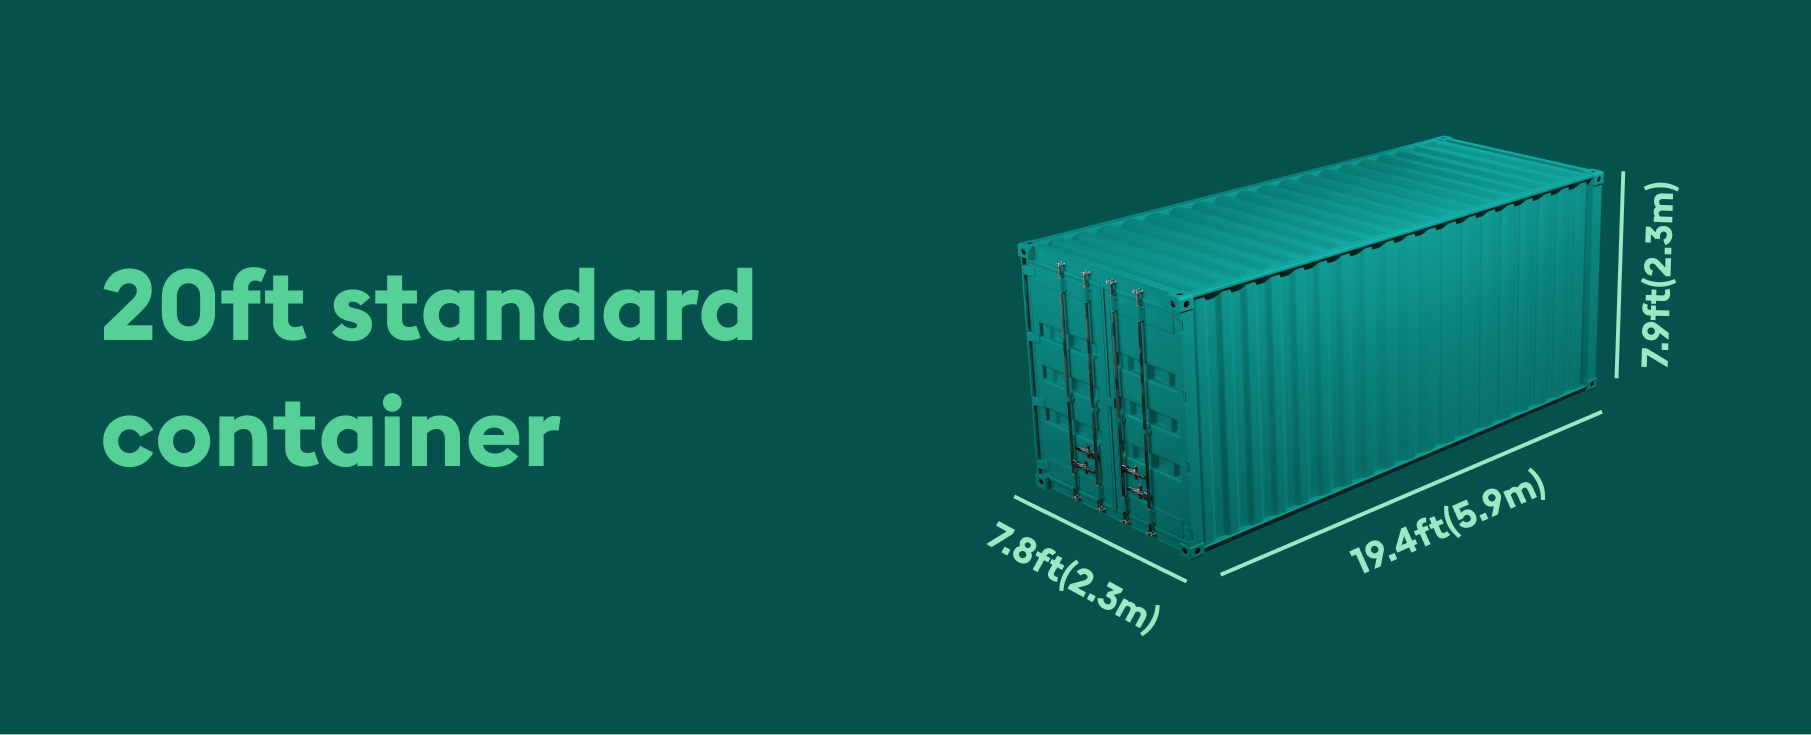 20ft standard container dimensions